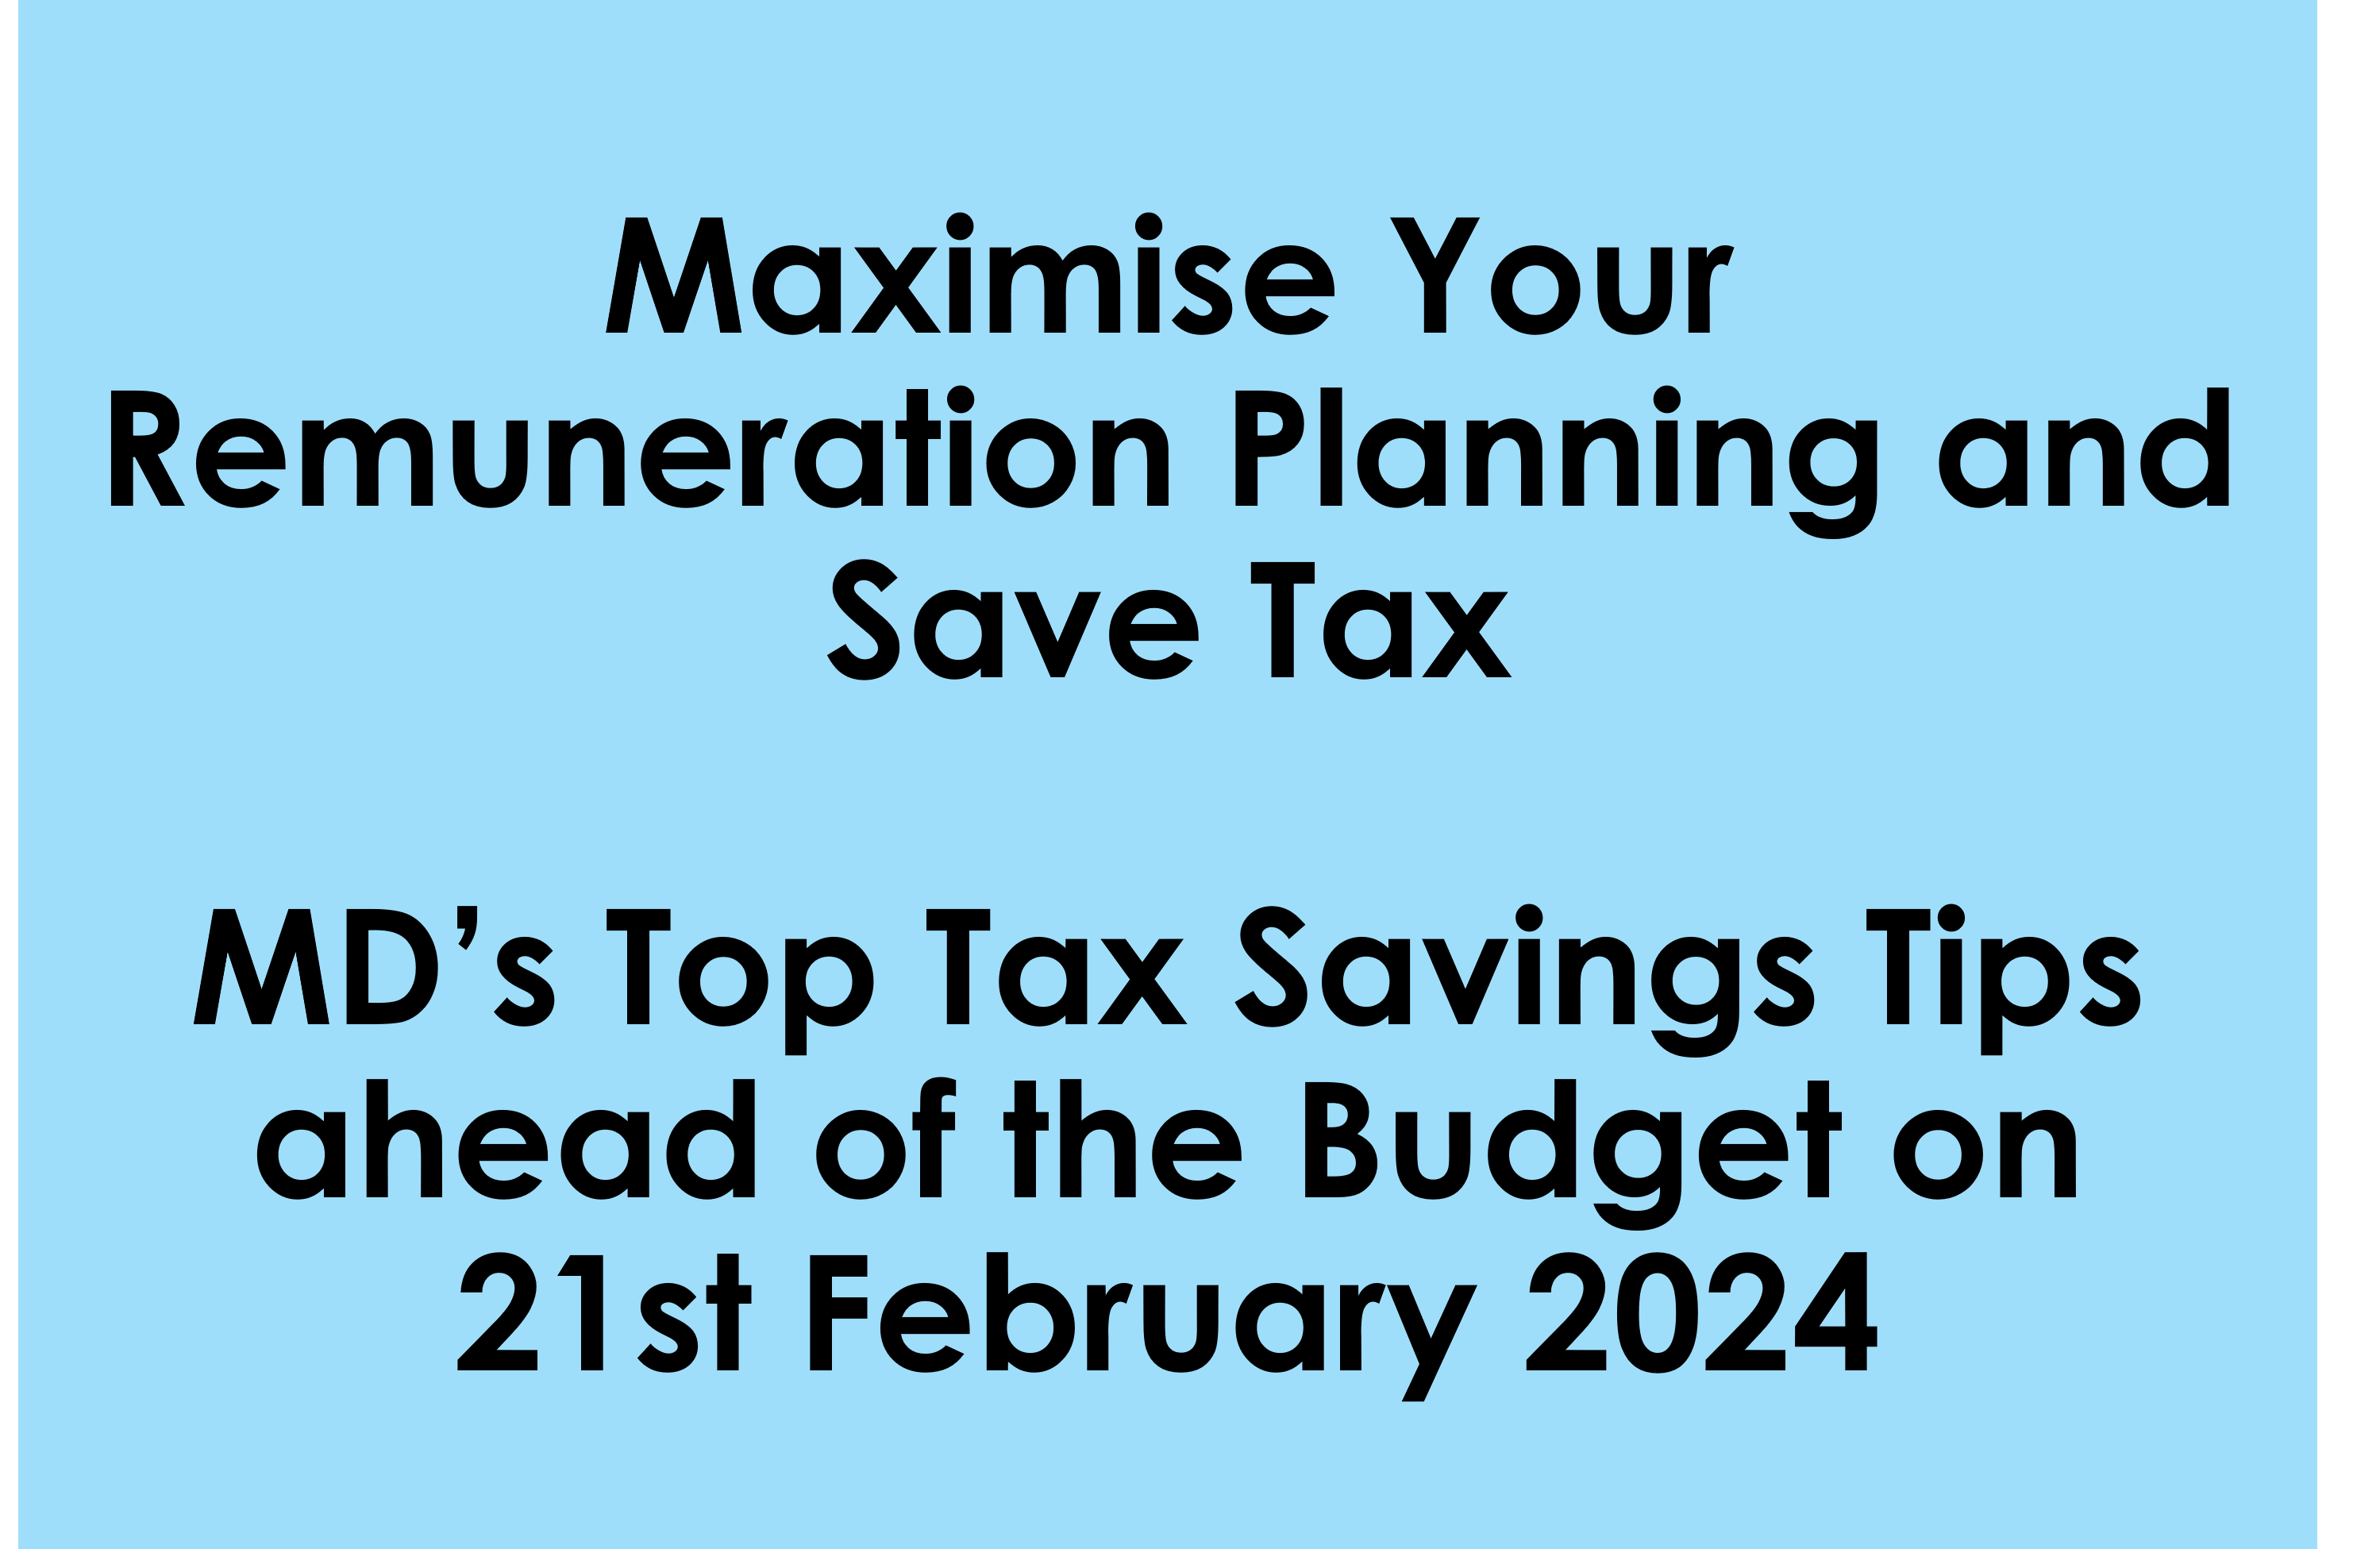 Maximise Your Remuneration Planning and Save Tax | MD’s Top Tax Savings Tips ahead of the Budget on 21st February 2024